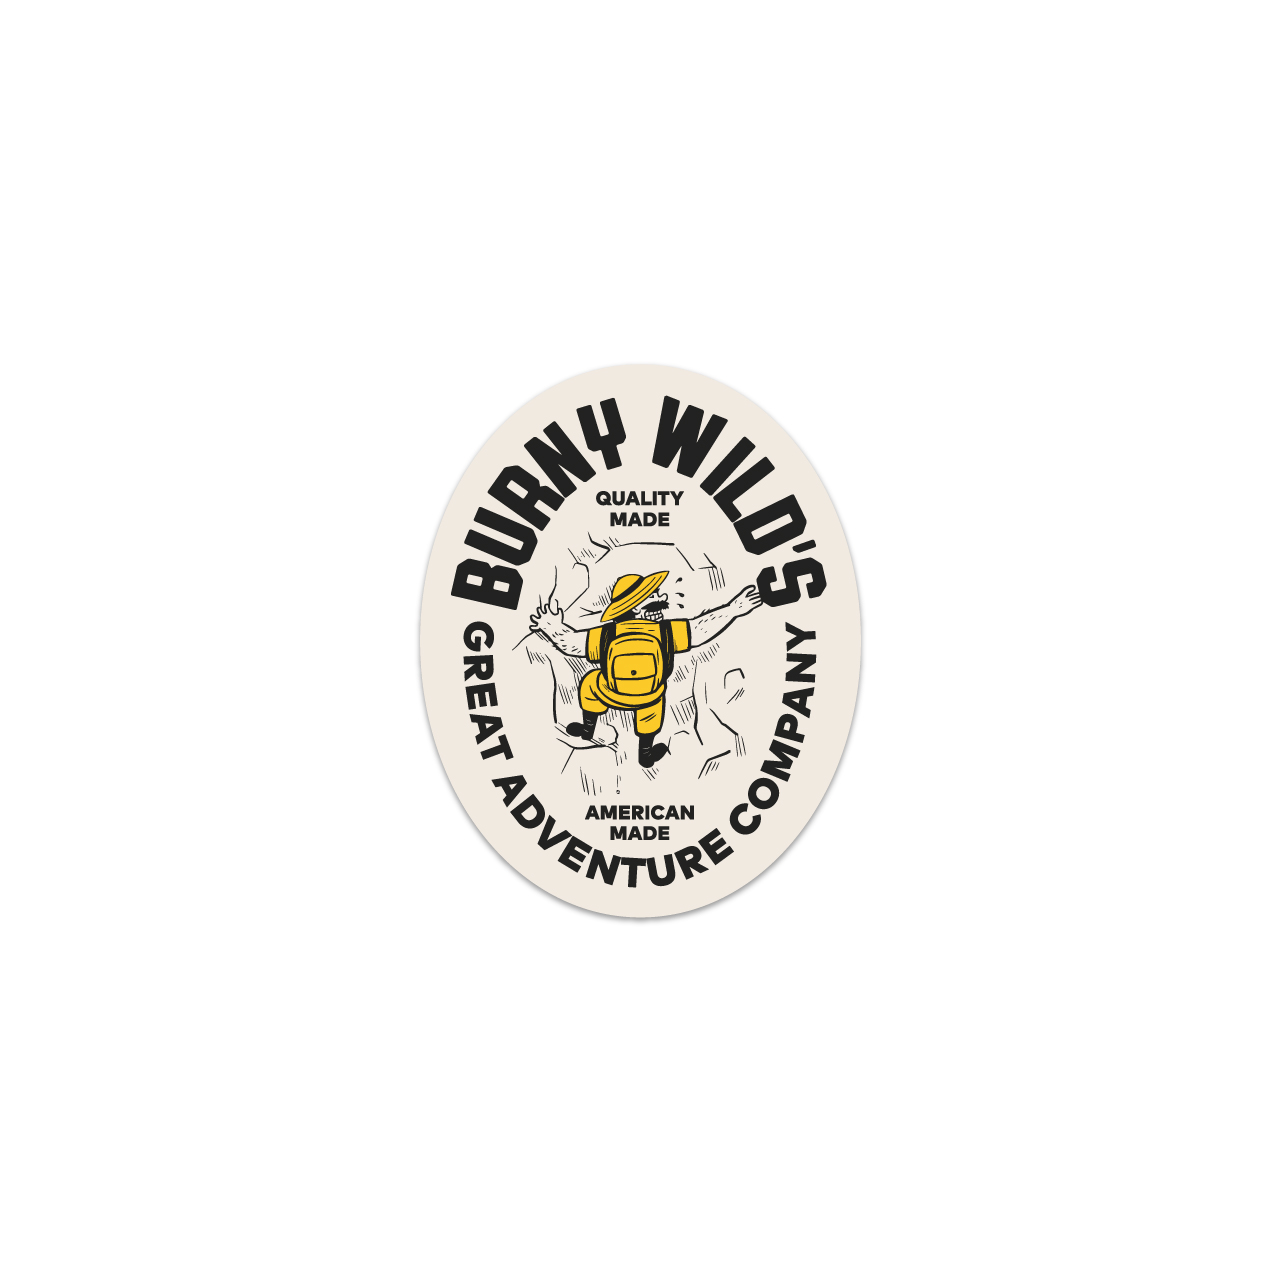 Quality Made Goods, Great Outdoor Company | Burny Wild's Sticker